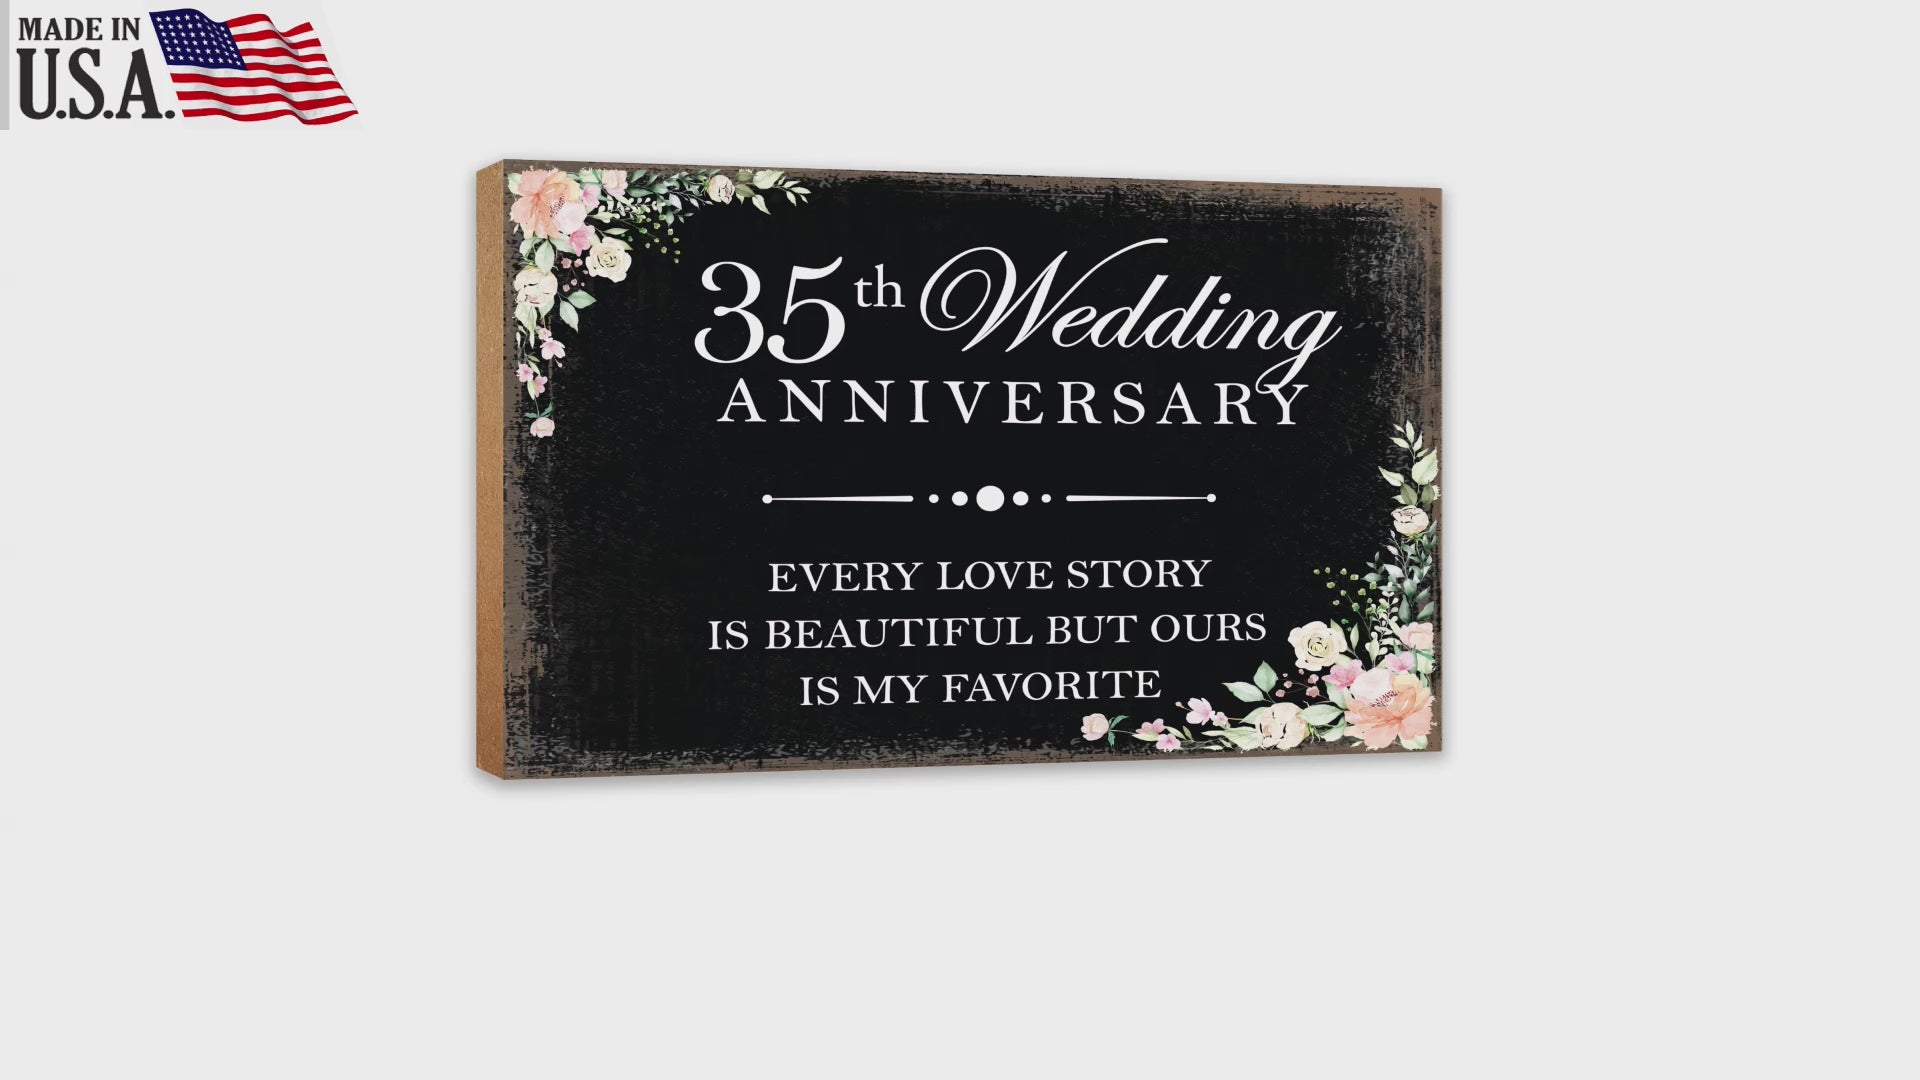 35th Wedding Anniversary Unique Shelf Decor and Tabletop Signs Gift for Couples - Every Love Story